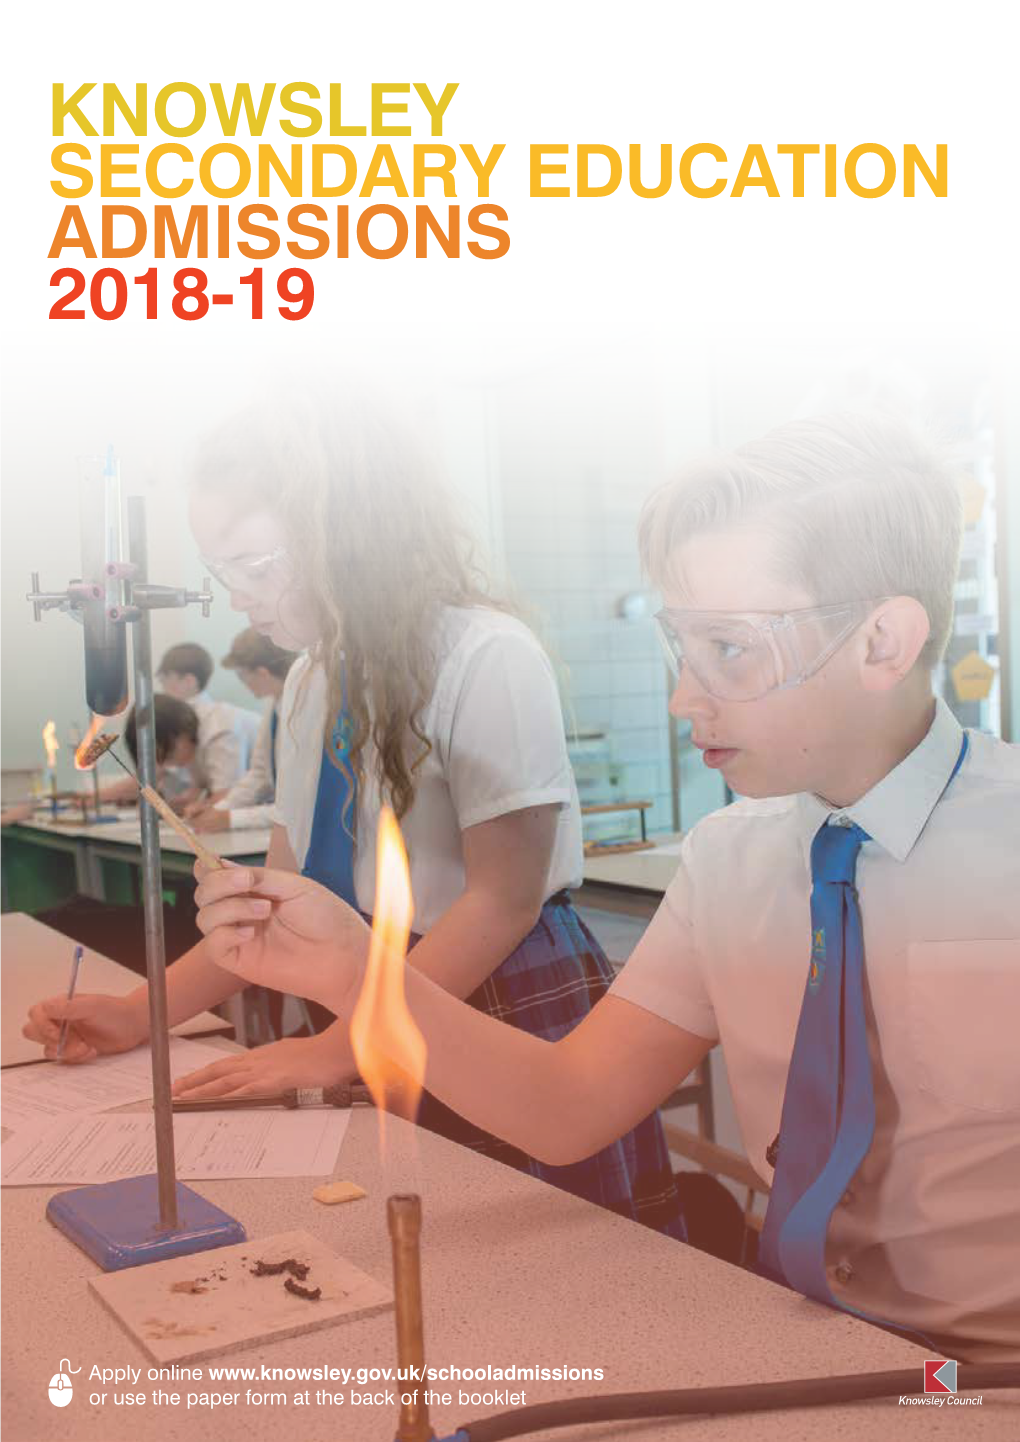 Knowsley Secondary Education Admissions 2018-19